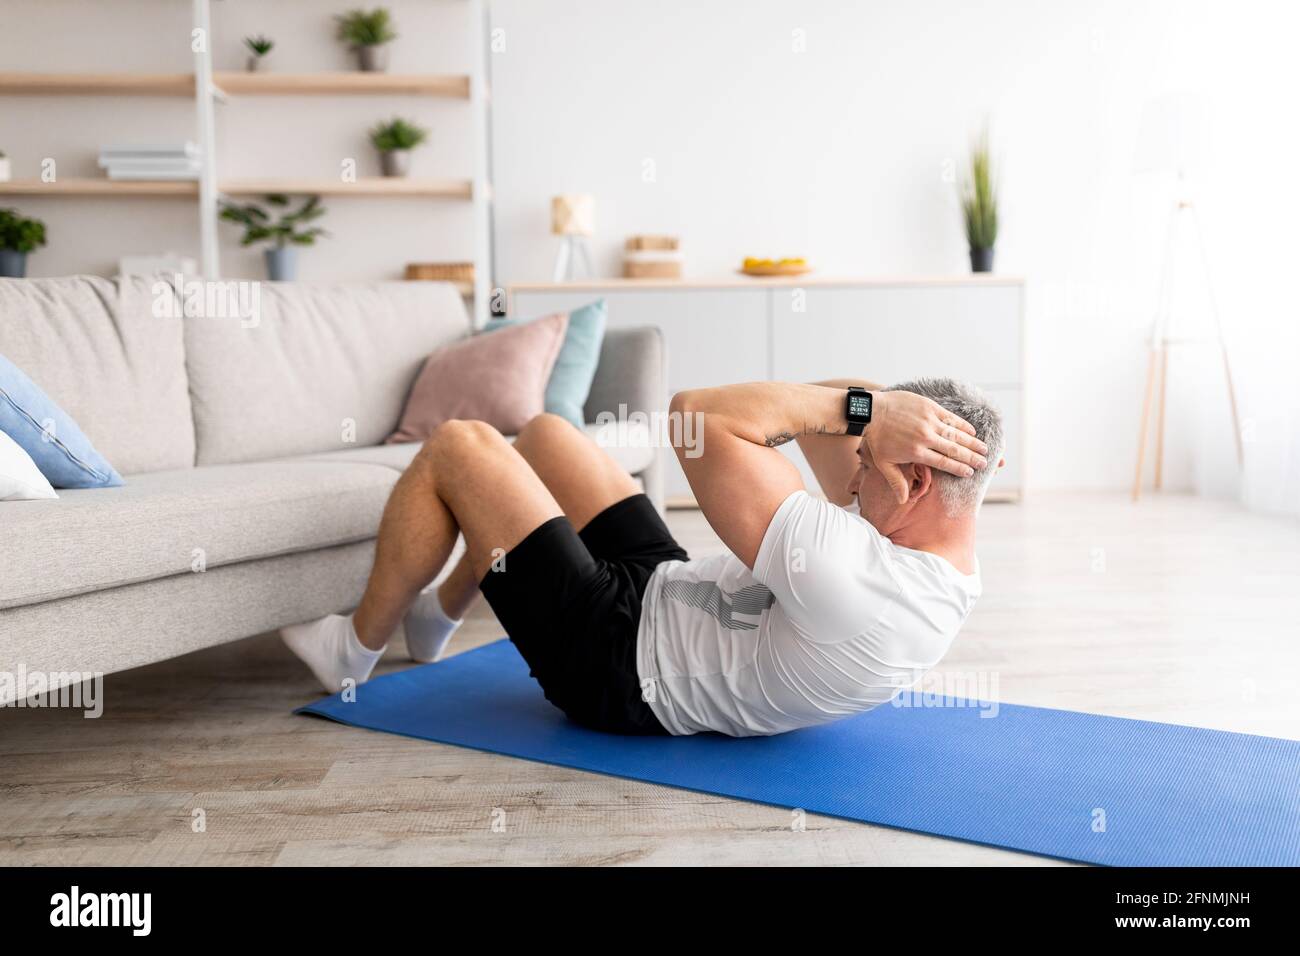 Workout at home. Mature man doing abs crunches near sofa, exercising in  living room at home Stock Photo - Alamy